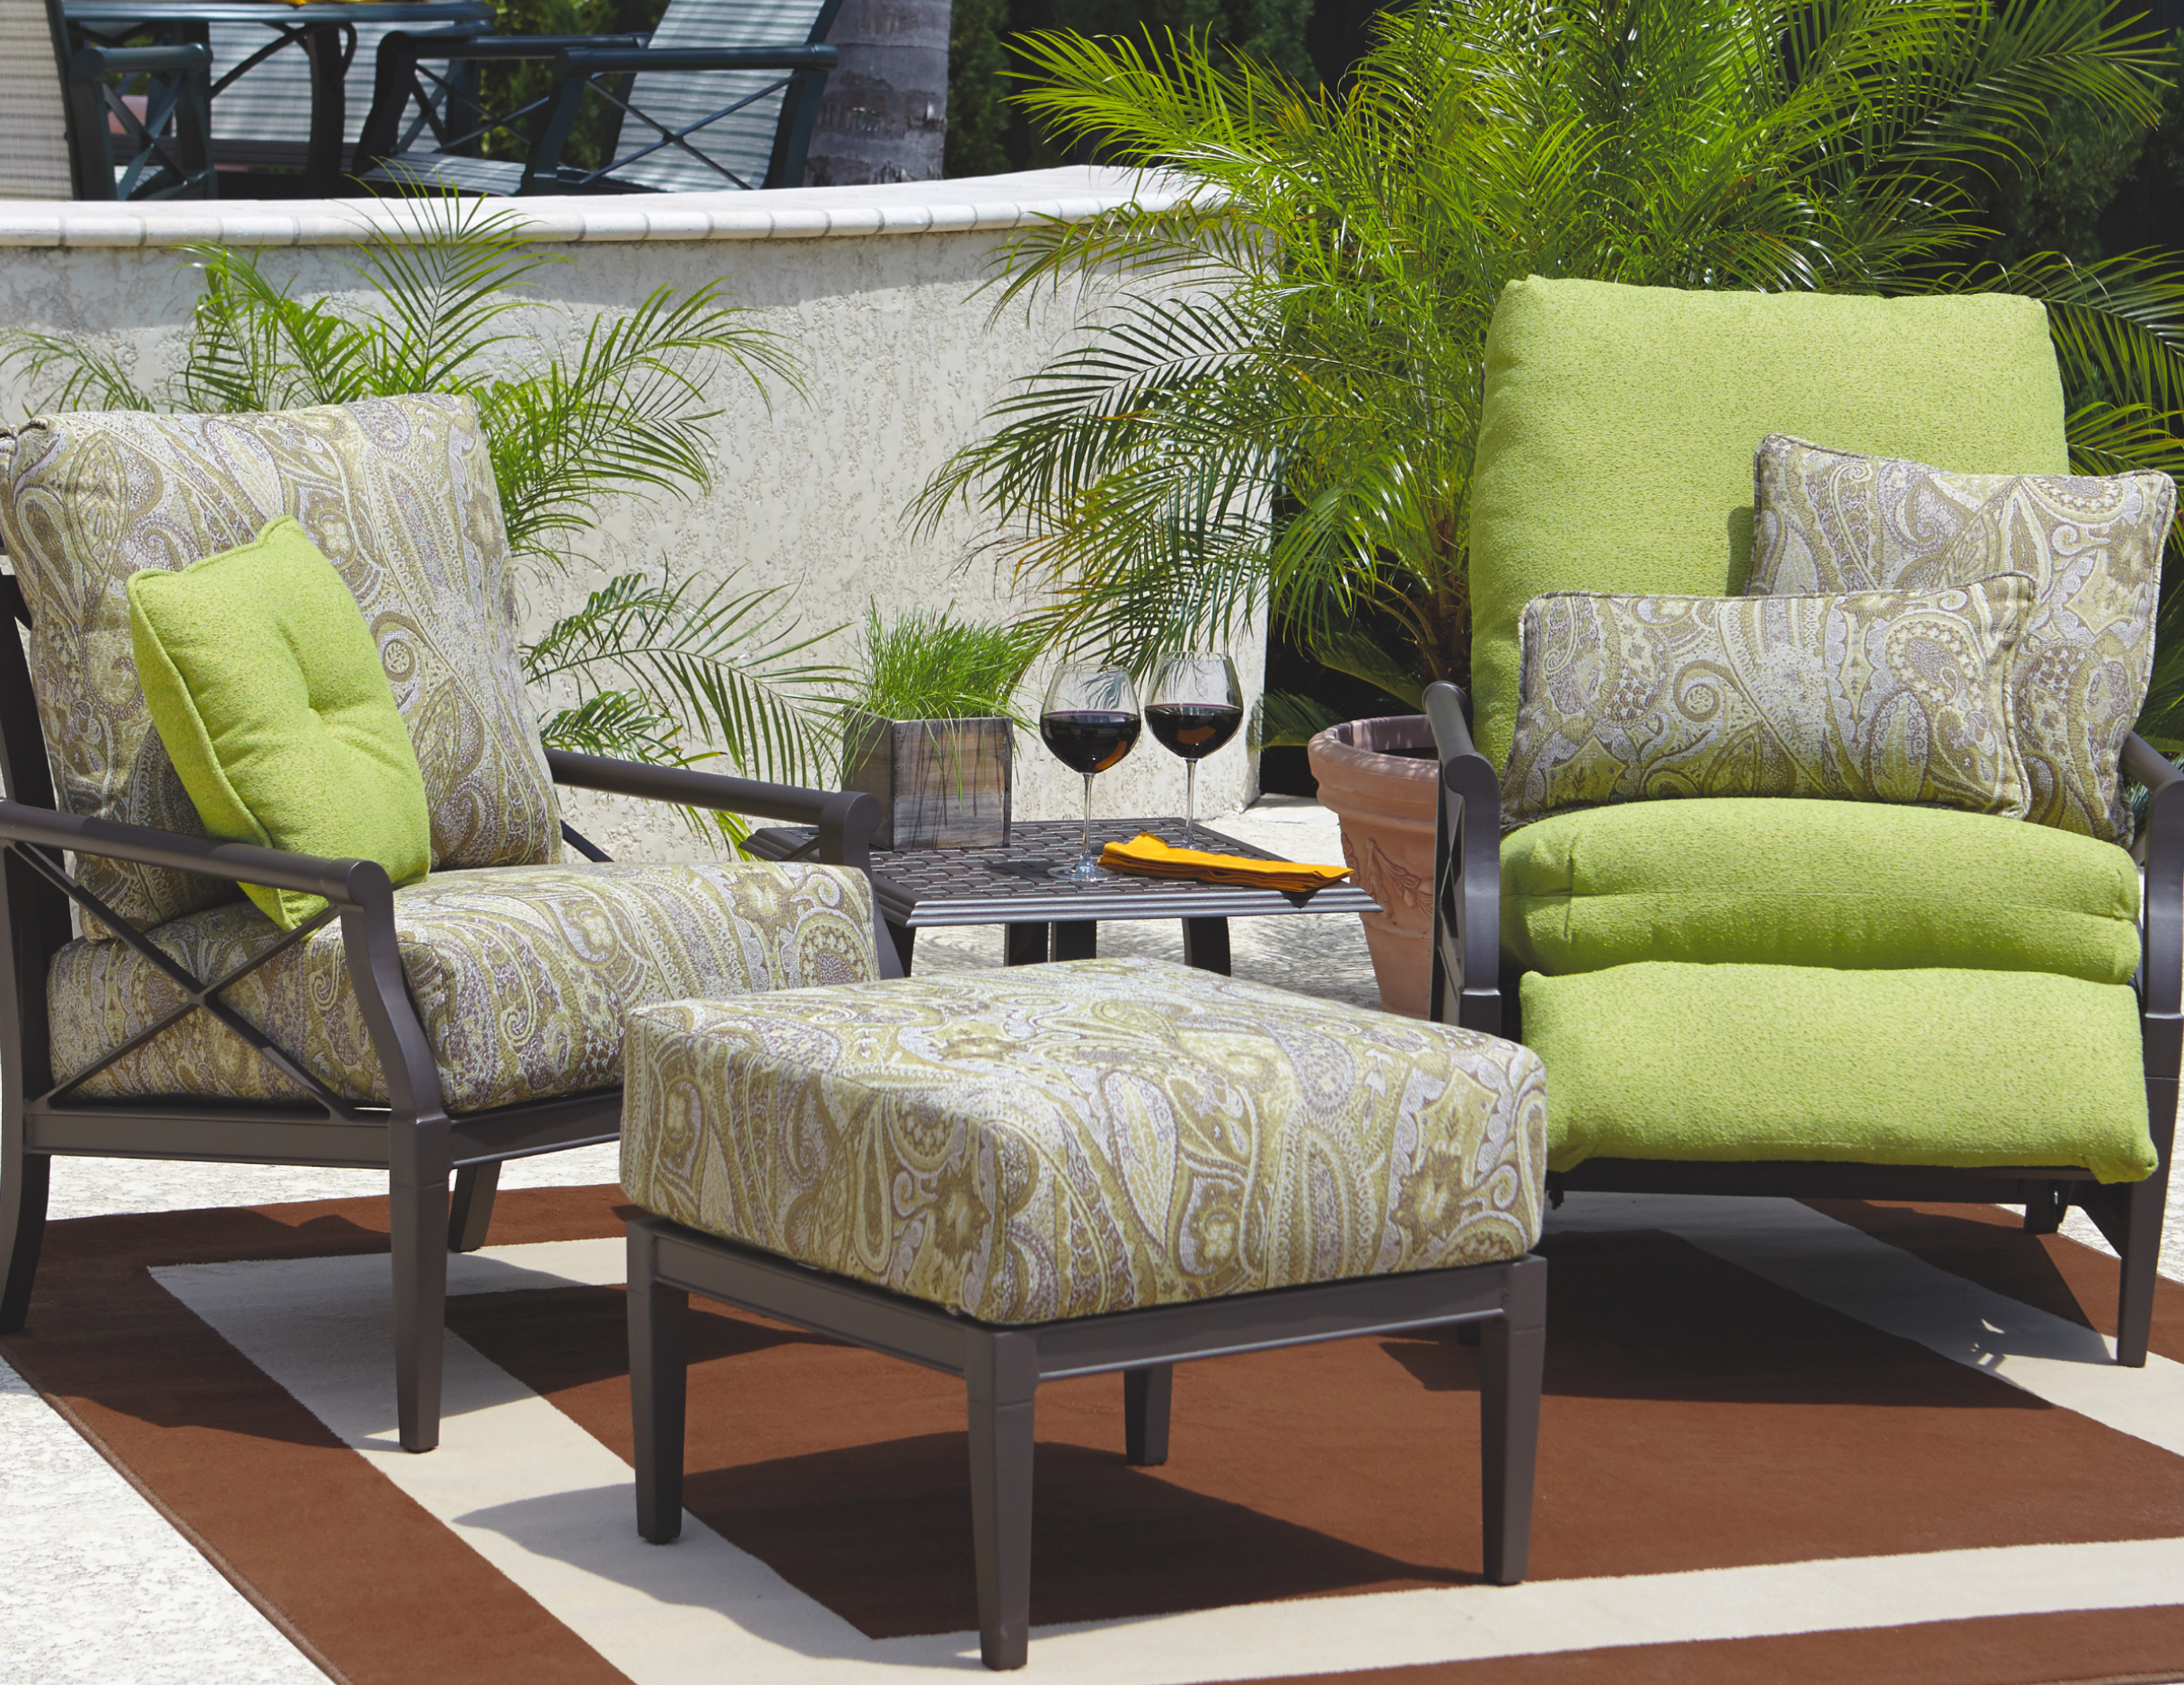 High-quality replacement cushions in a variety of colors and fabrics for your patio furniture.